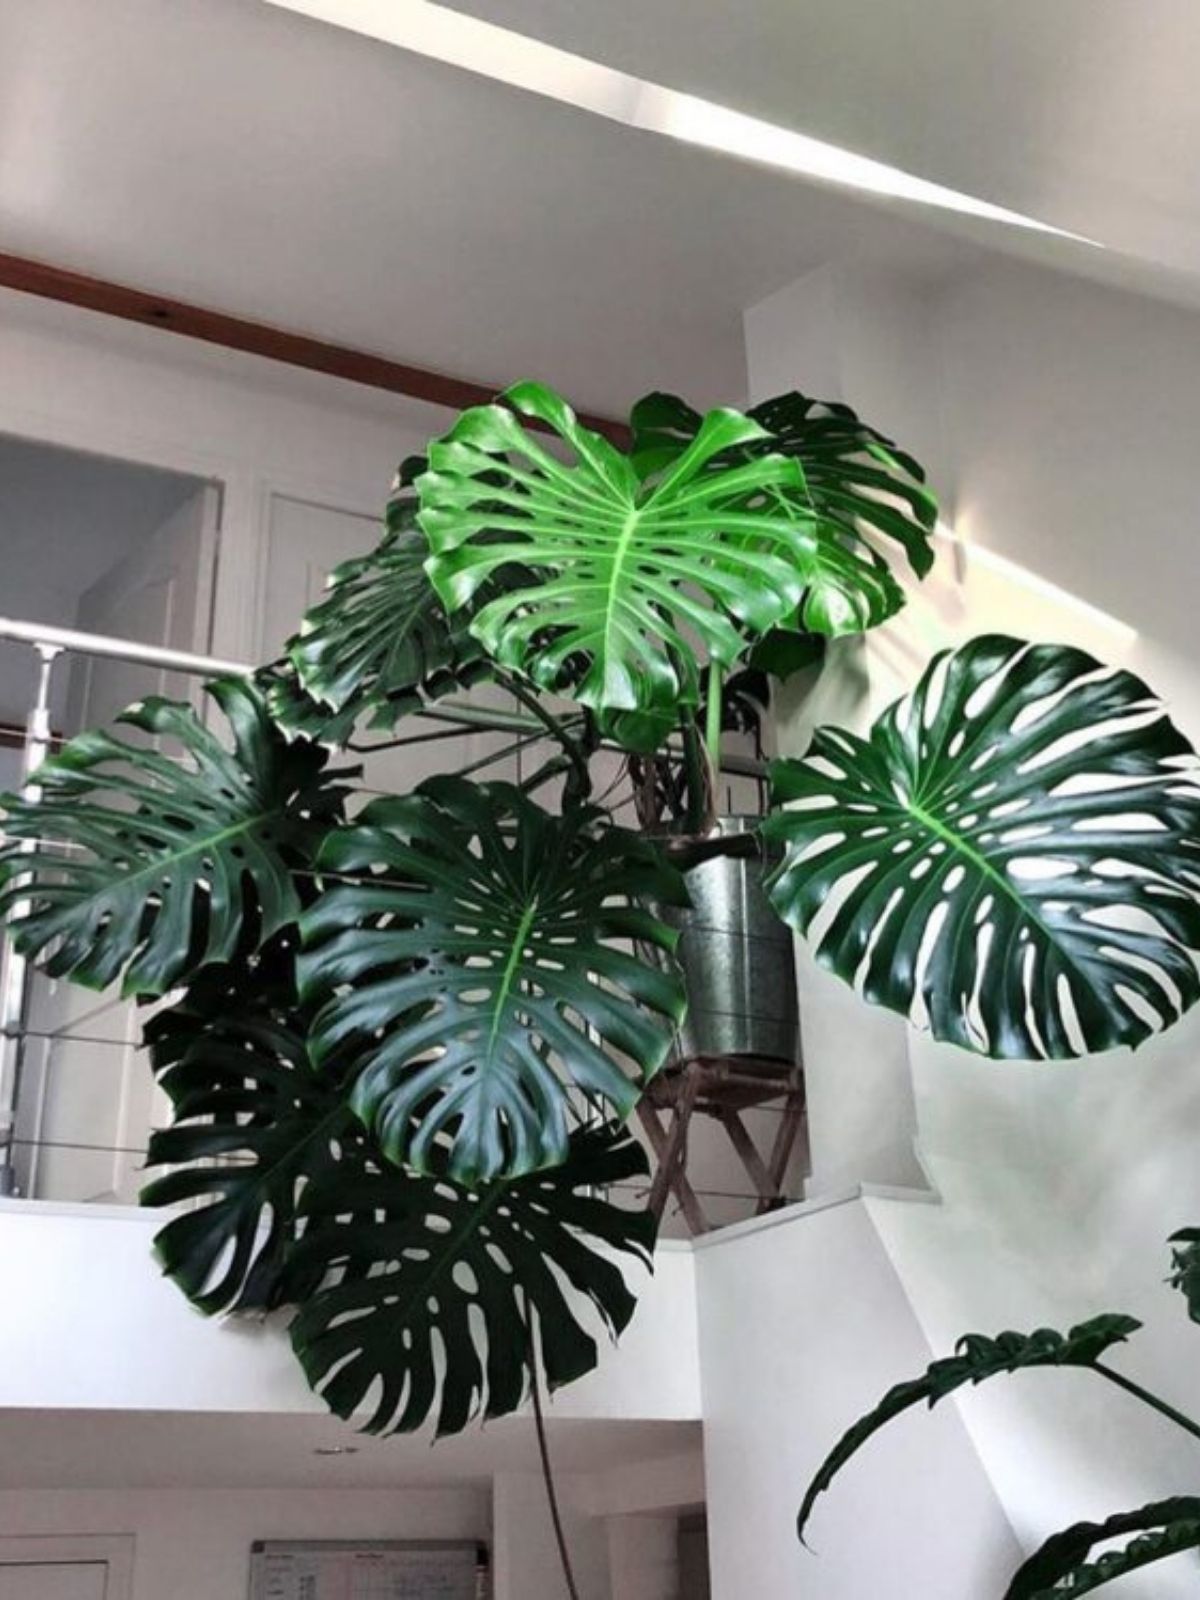 Big monstera plant in home